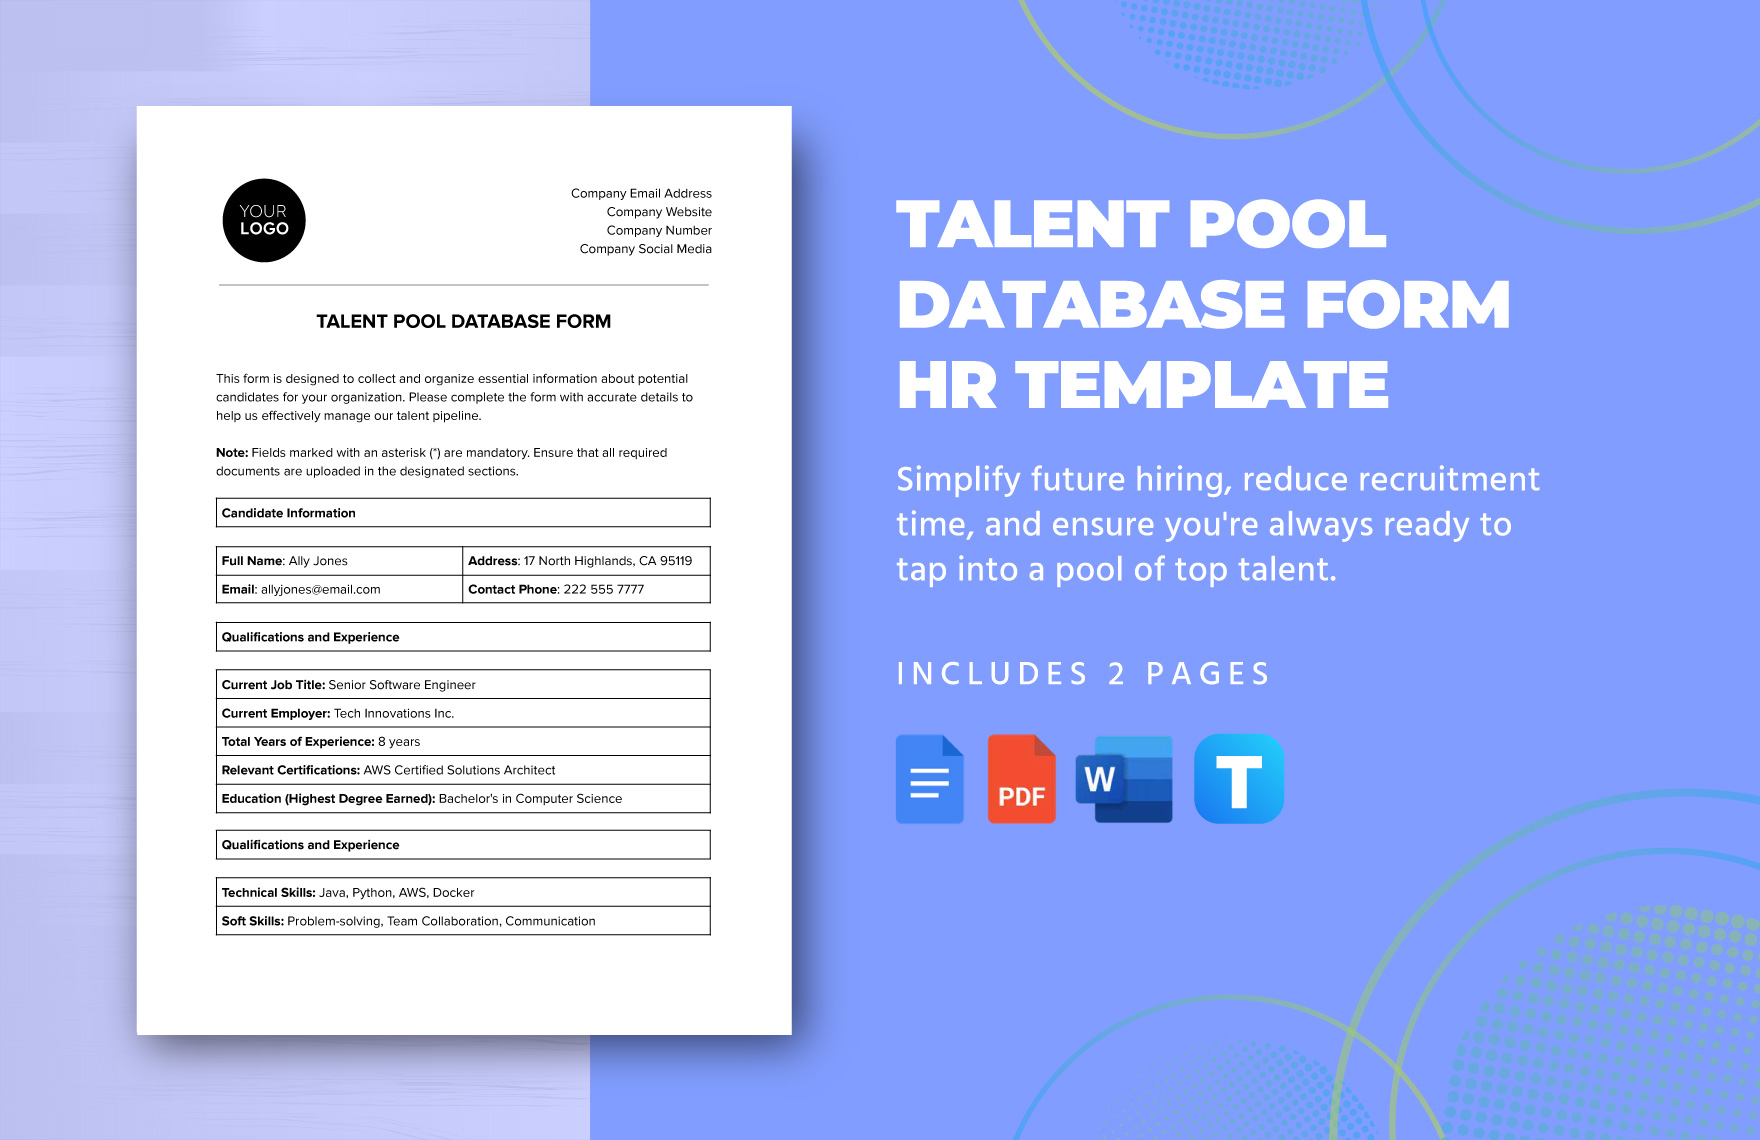 Talent Pool Database Form HR Template in Word, Google Docs, PDF